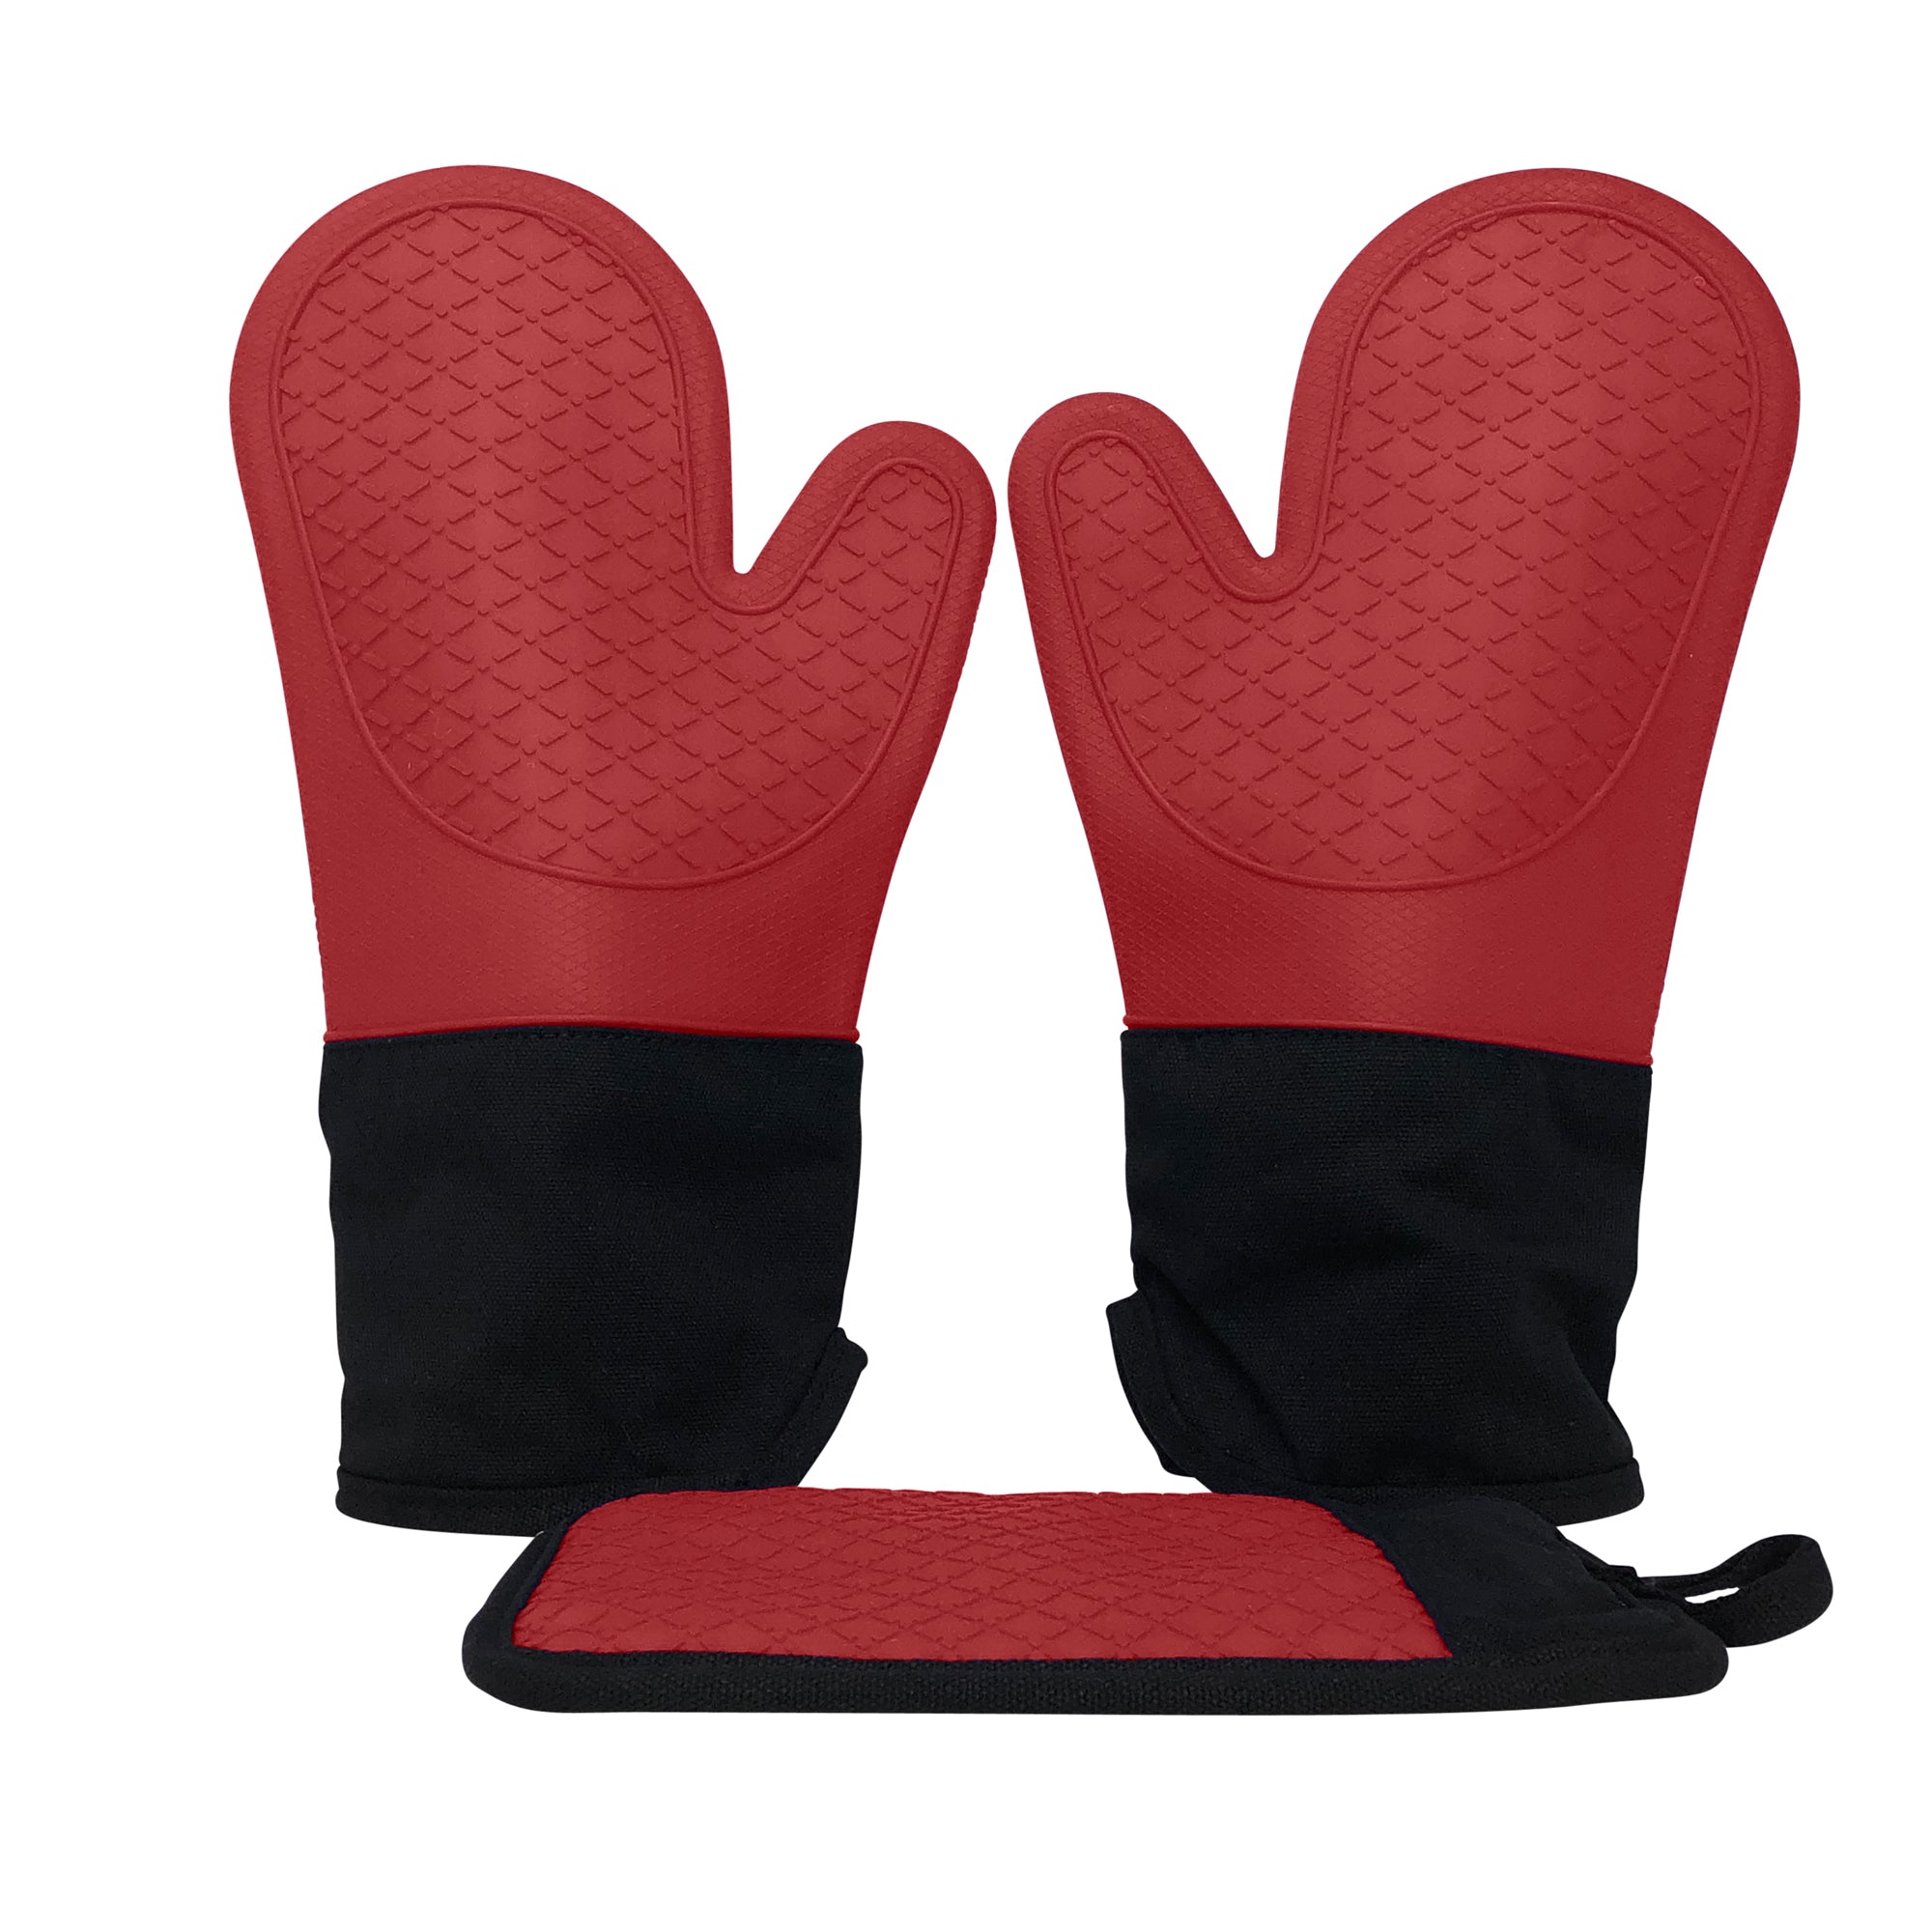 Ecoberi Oven Mitt and Potholder Set, Heat Resistant Silicone, Non-Slip Grip, Cook, Bake, BBQ, Set of 3 (deep Red)